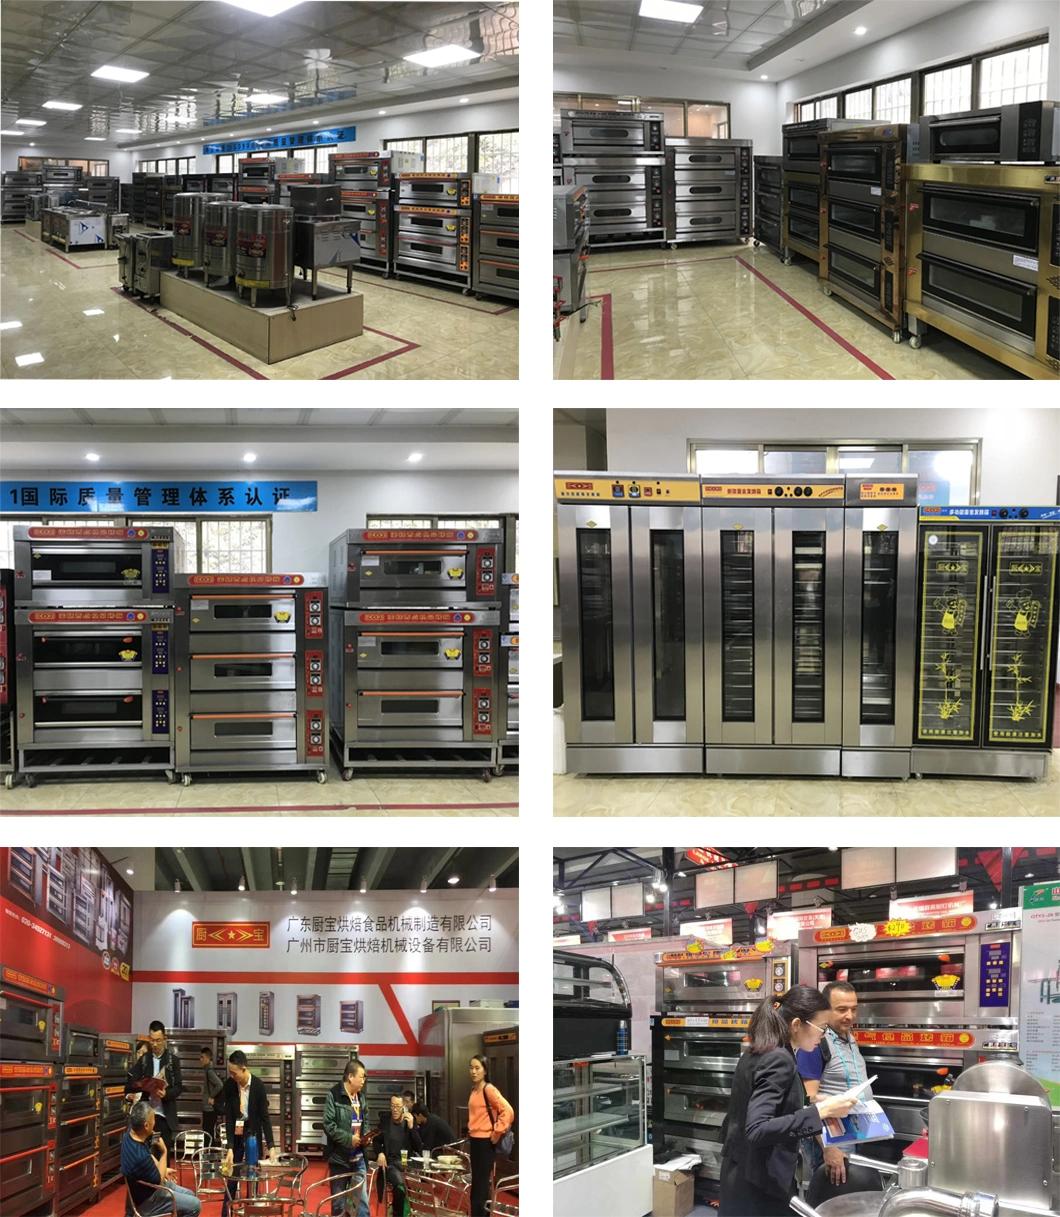 2 Deck 4 Trays Electric Oven for Commercial Restaurant Kitchen Baking Equipment Bread Machine Bakery Machinery